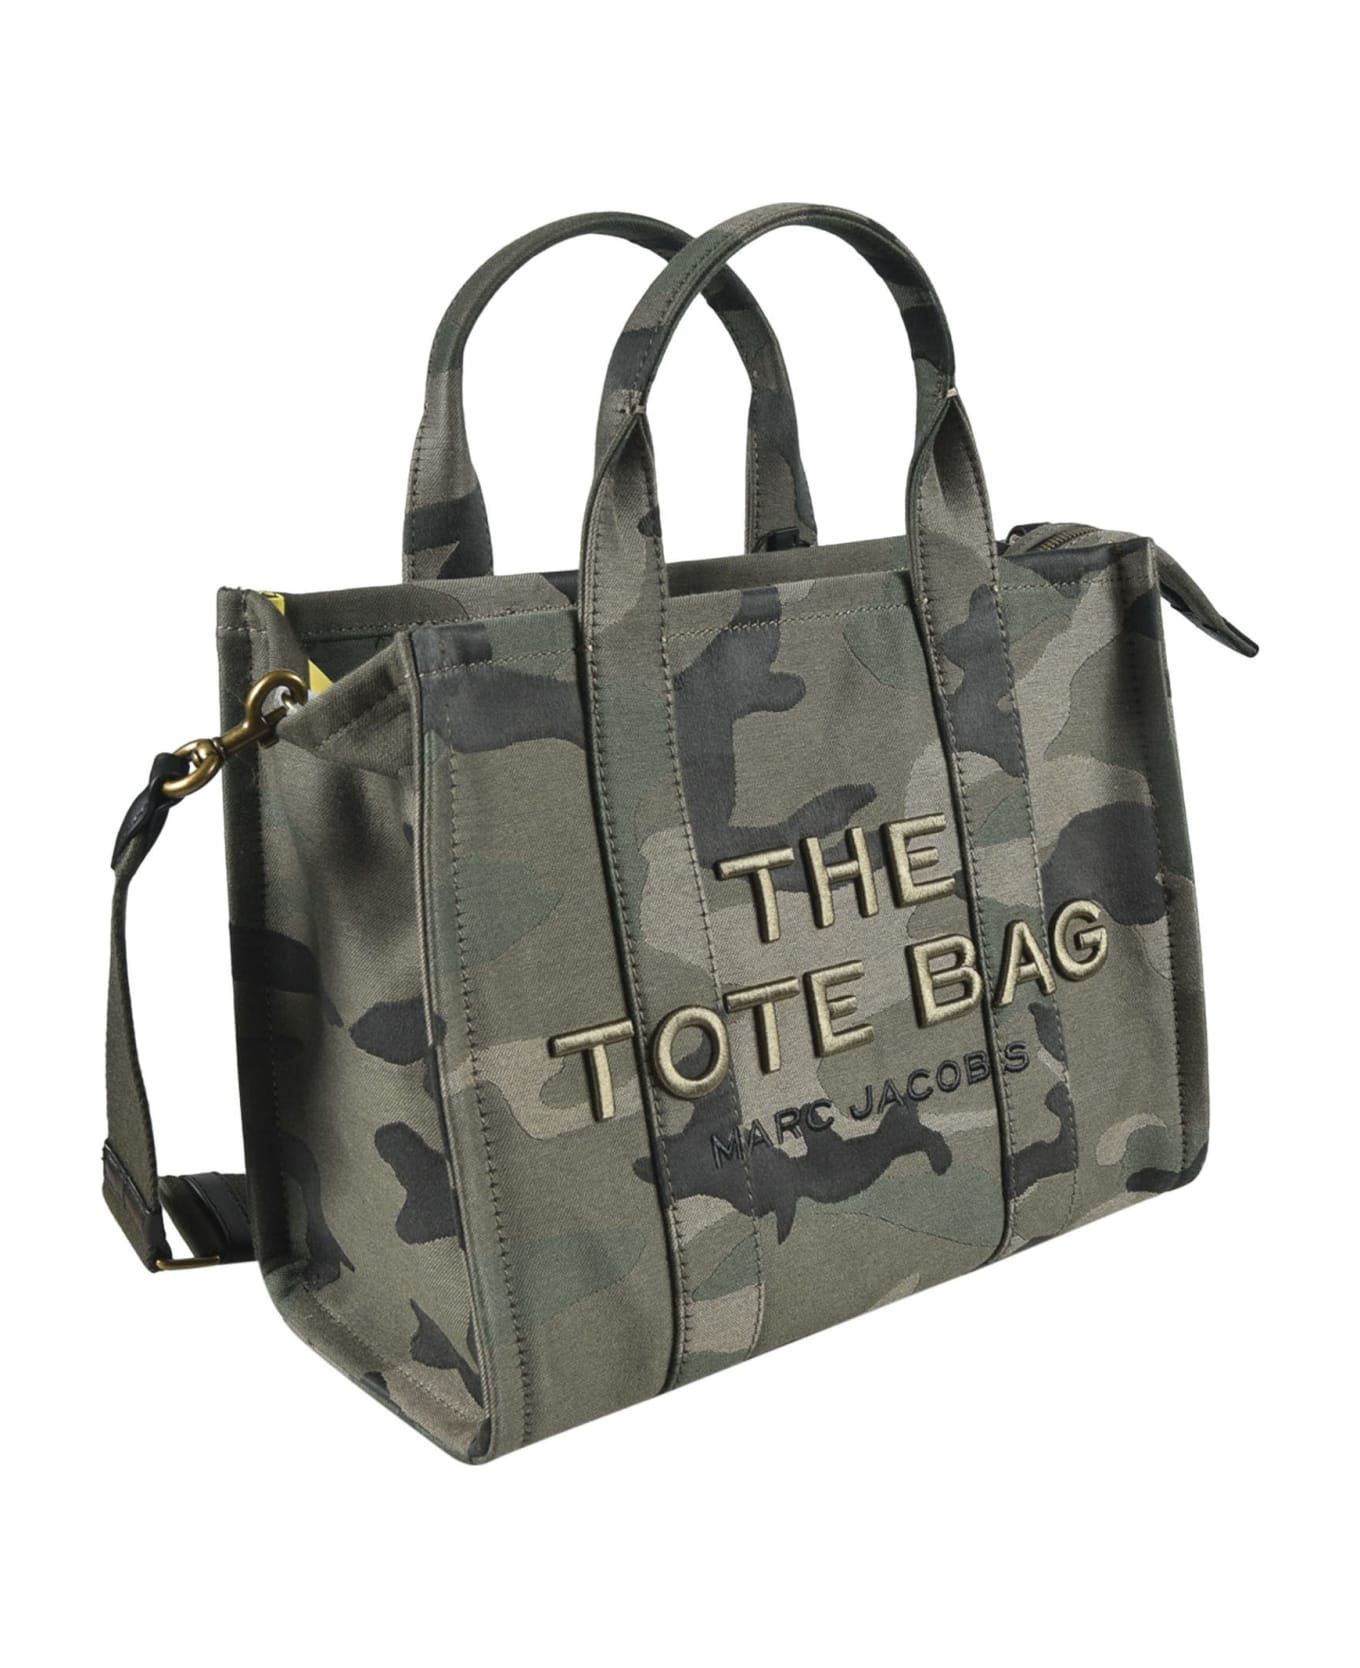 Marc Jacobs The Tote Bag Patched Tote - Camo/Multicolor トートバッグ